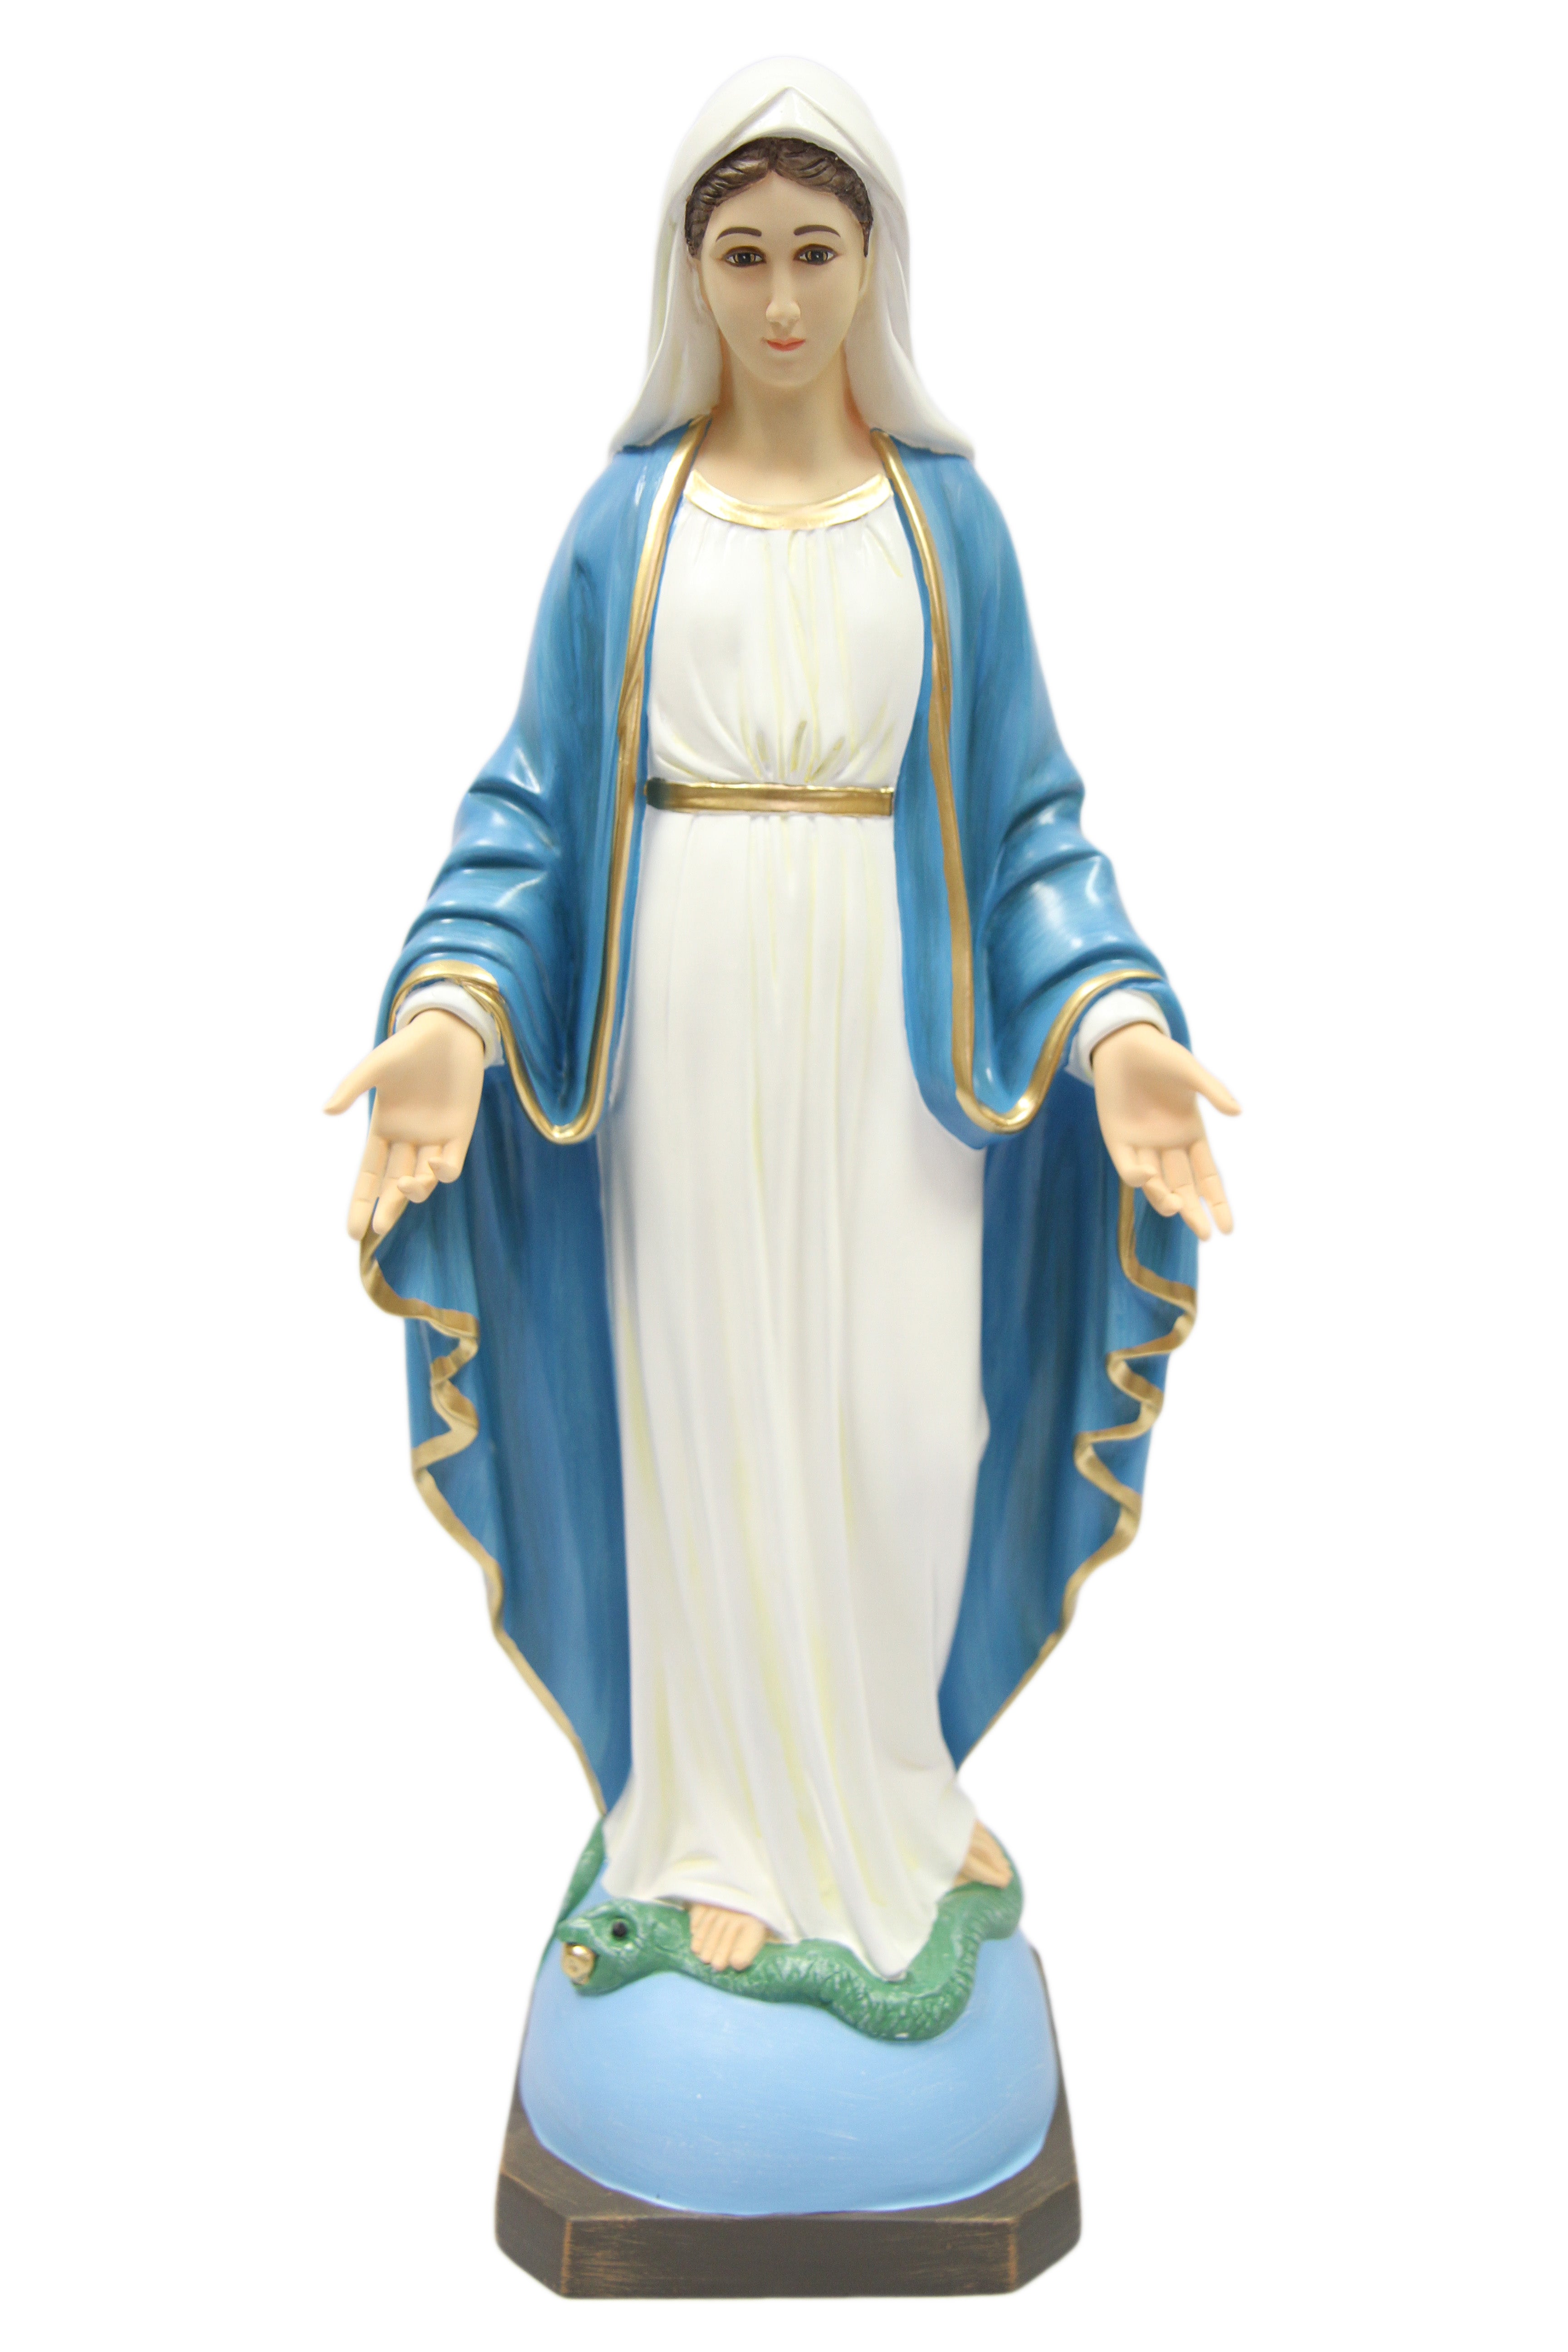 23.5 Inch Our Lady of Grace Virgin Mary Catholic Statue Figurine Vittoria Collection Made in Italy